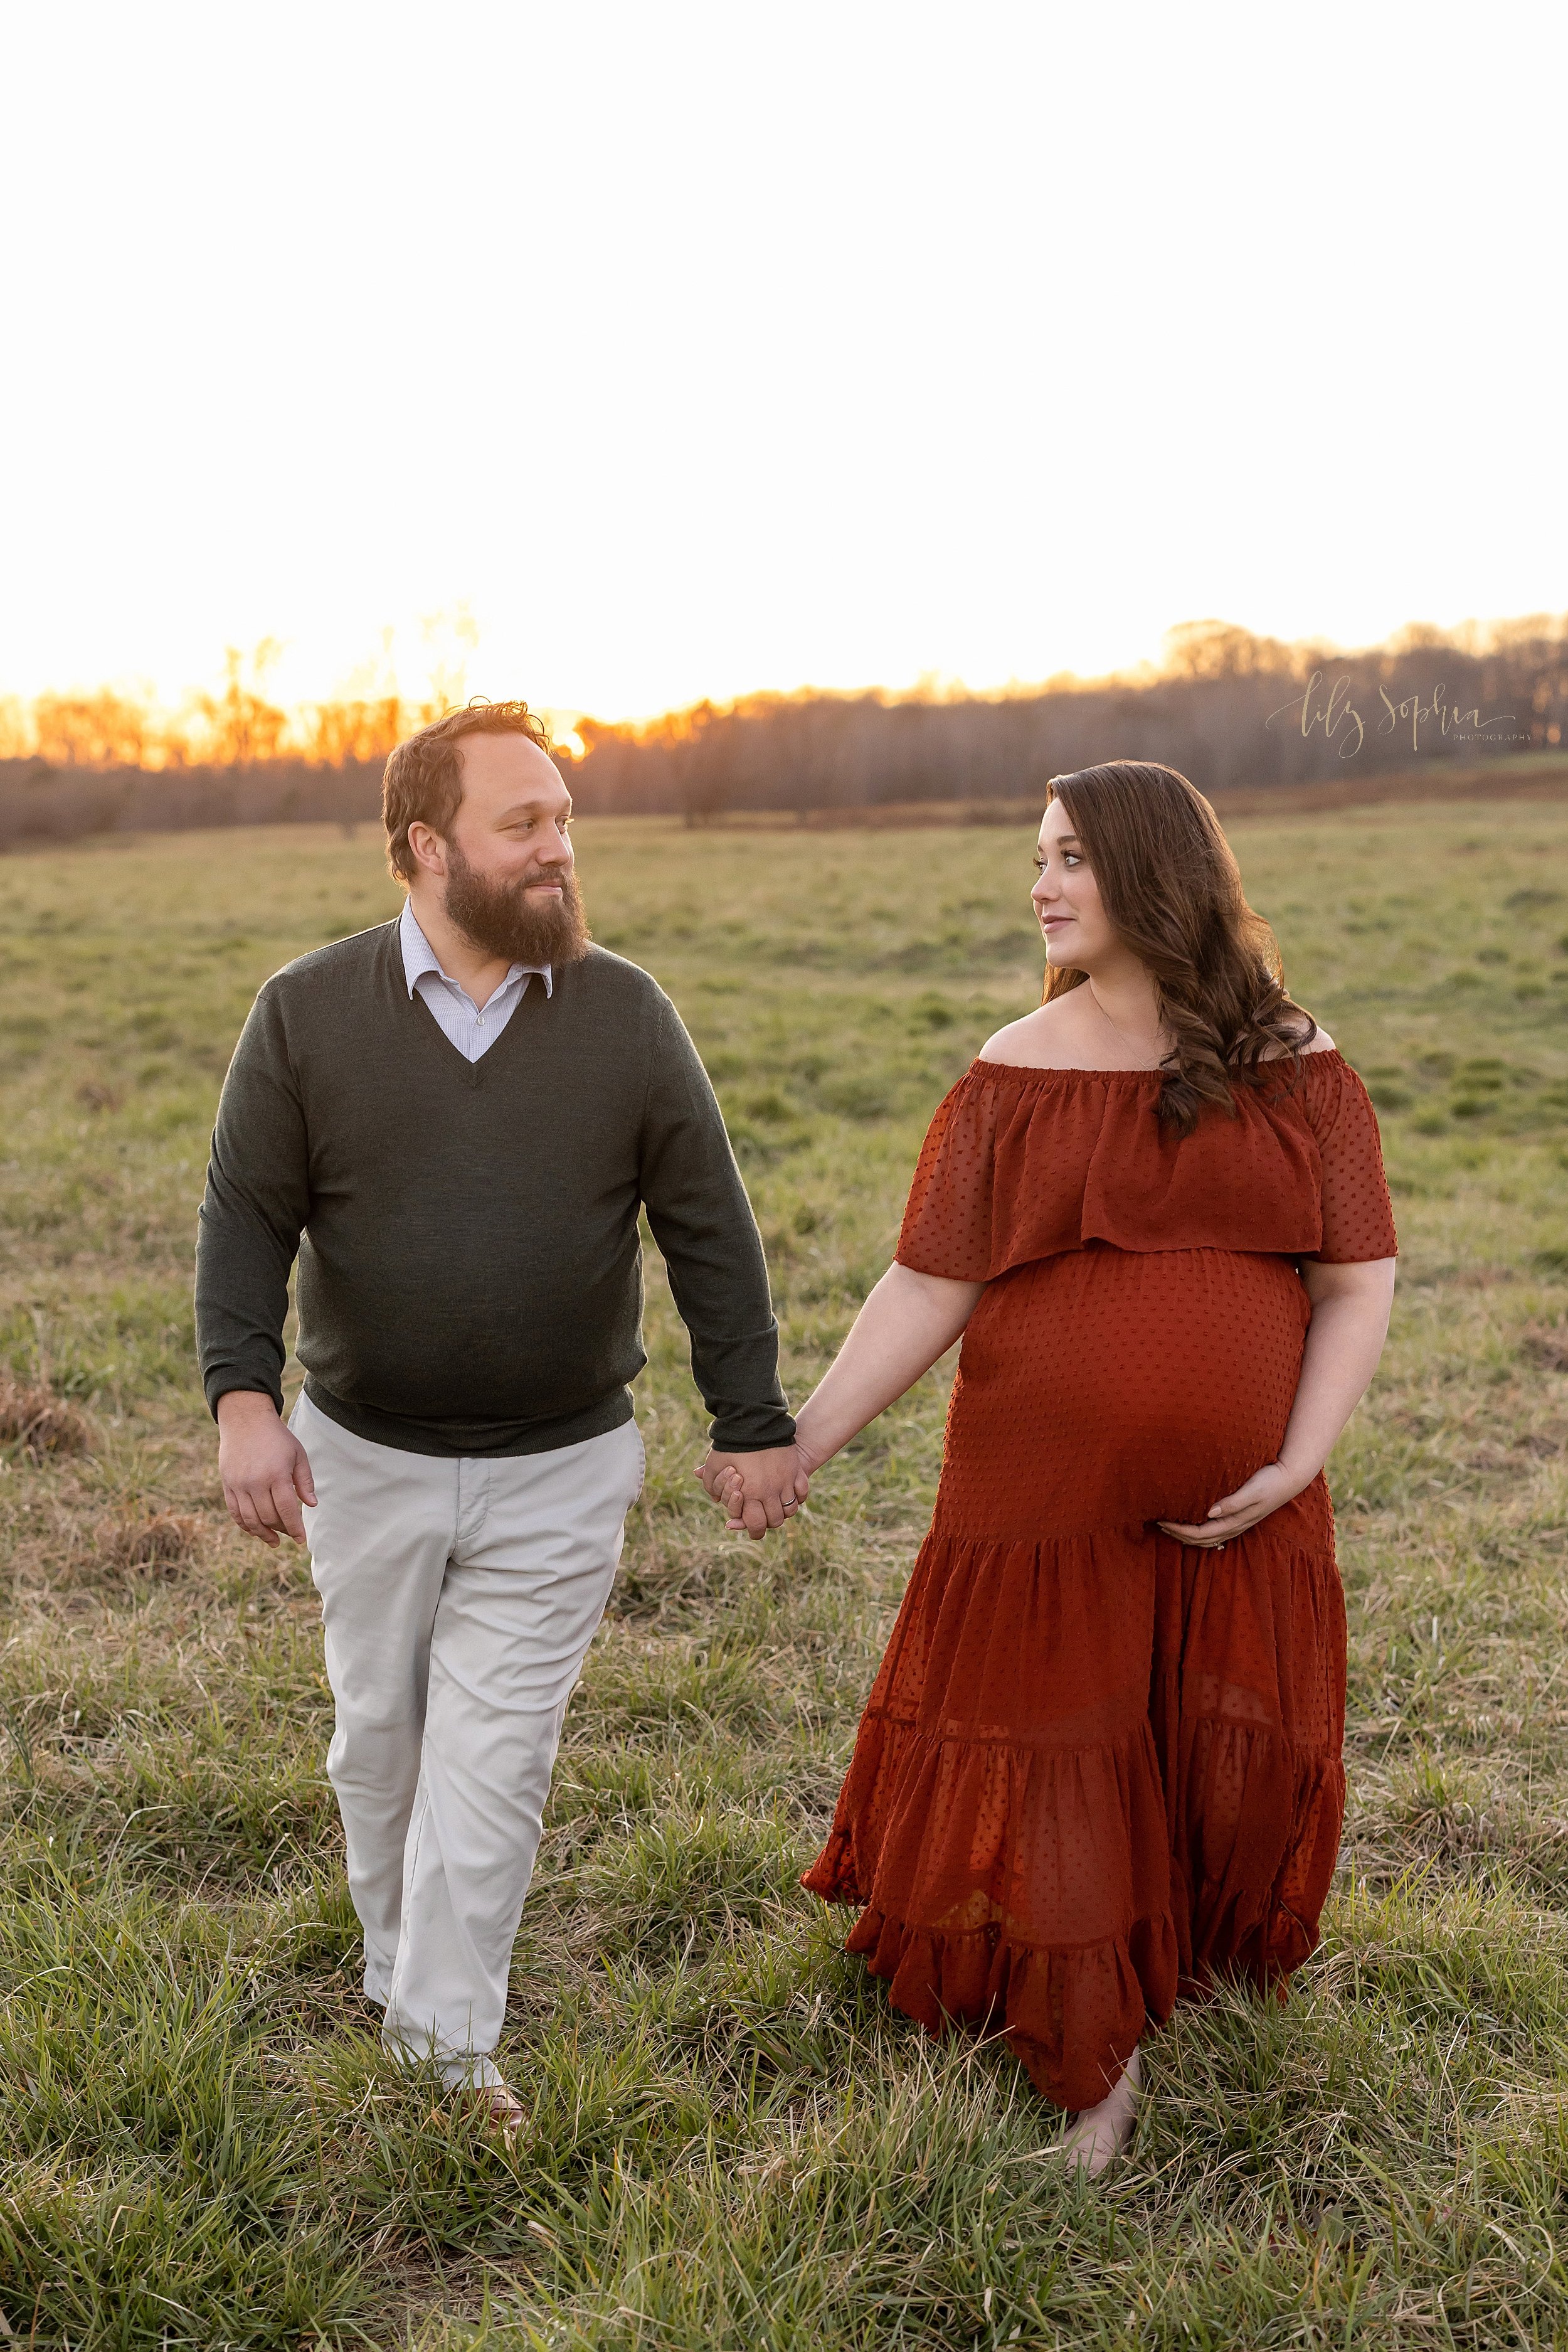  Fall maternity photoshoot of an expectant couple as the husband holds his wife’s right hand while walking through a field near at sunset near Atlanta, Georgia. 